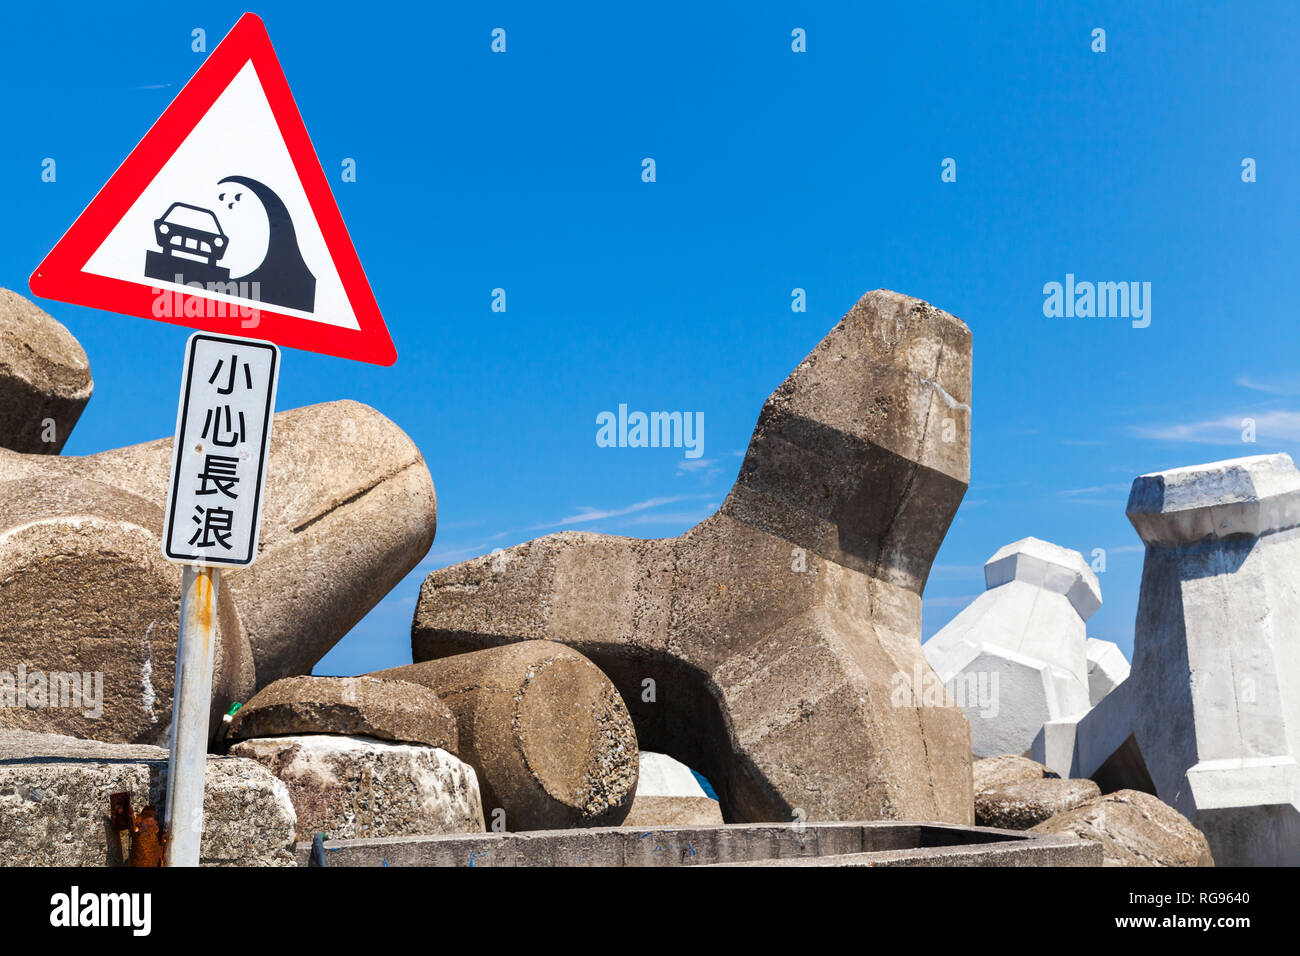 Caution Big Waves. Chinese road sign mounted on breakwater. Text label means: be careful with long waves Stock Photo